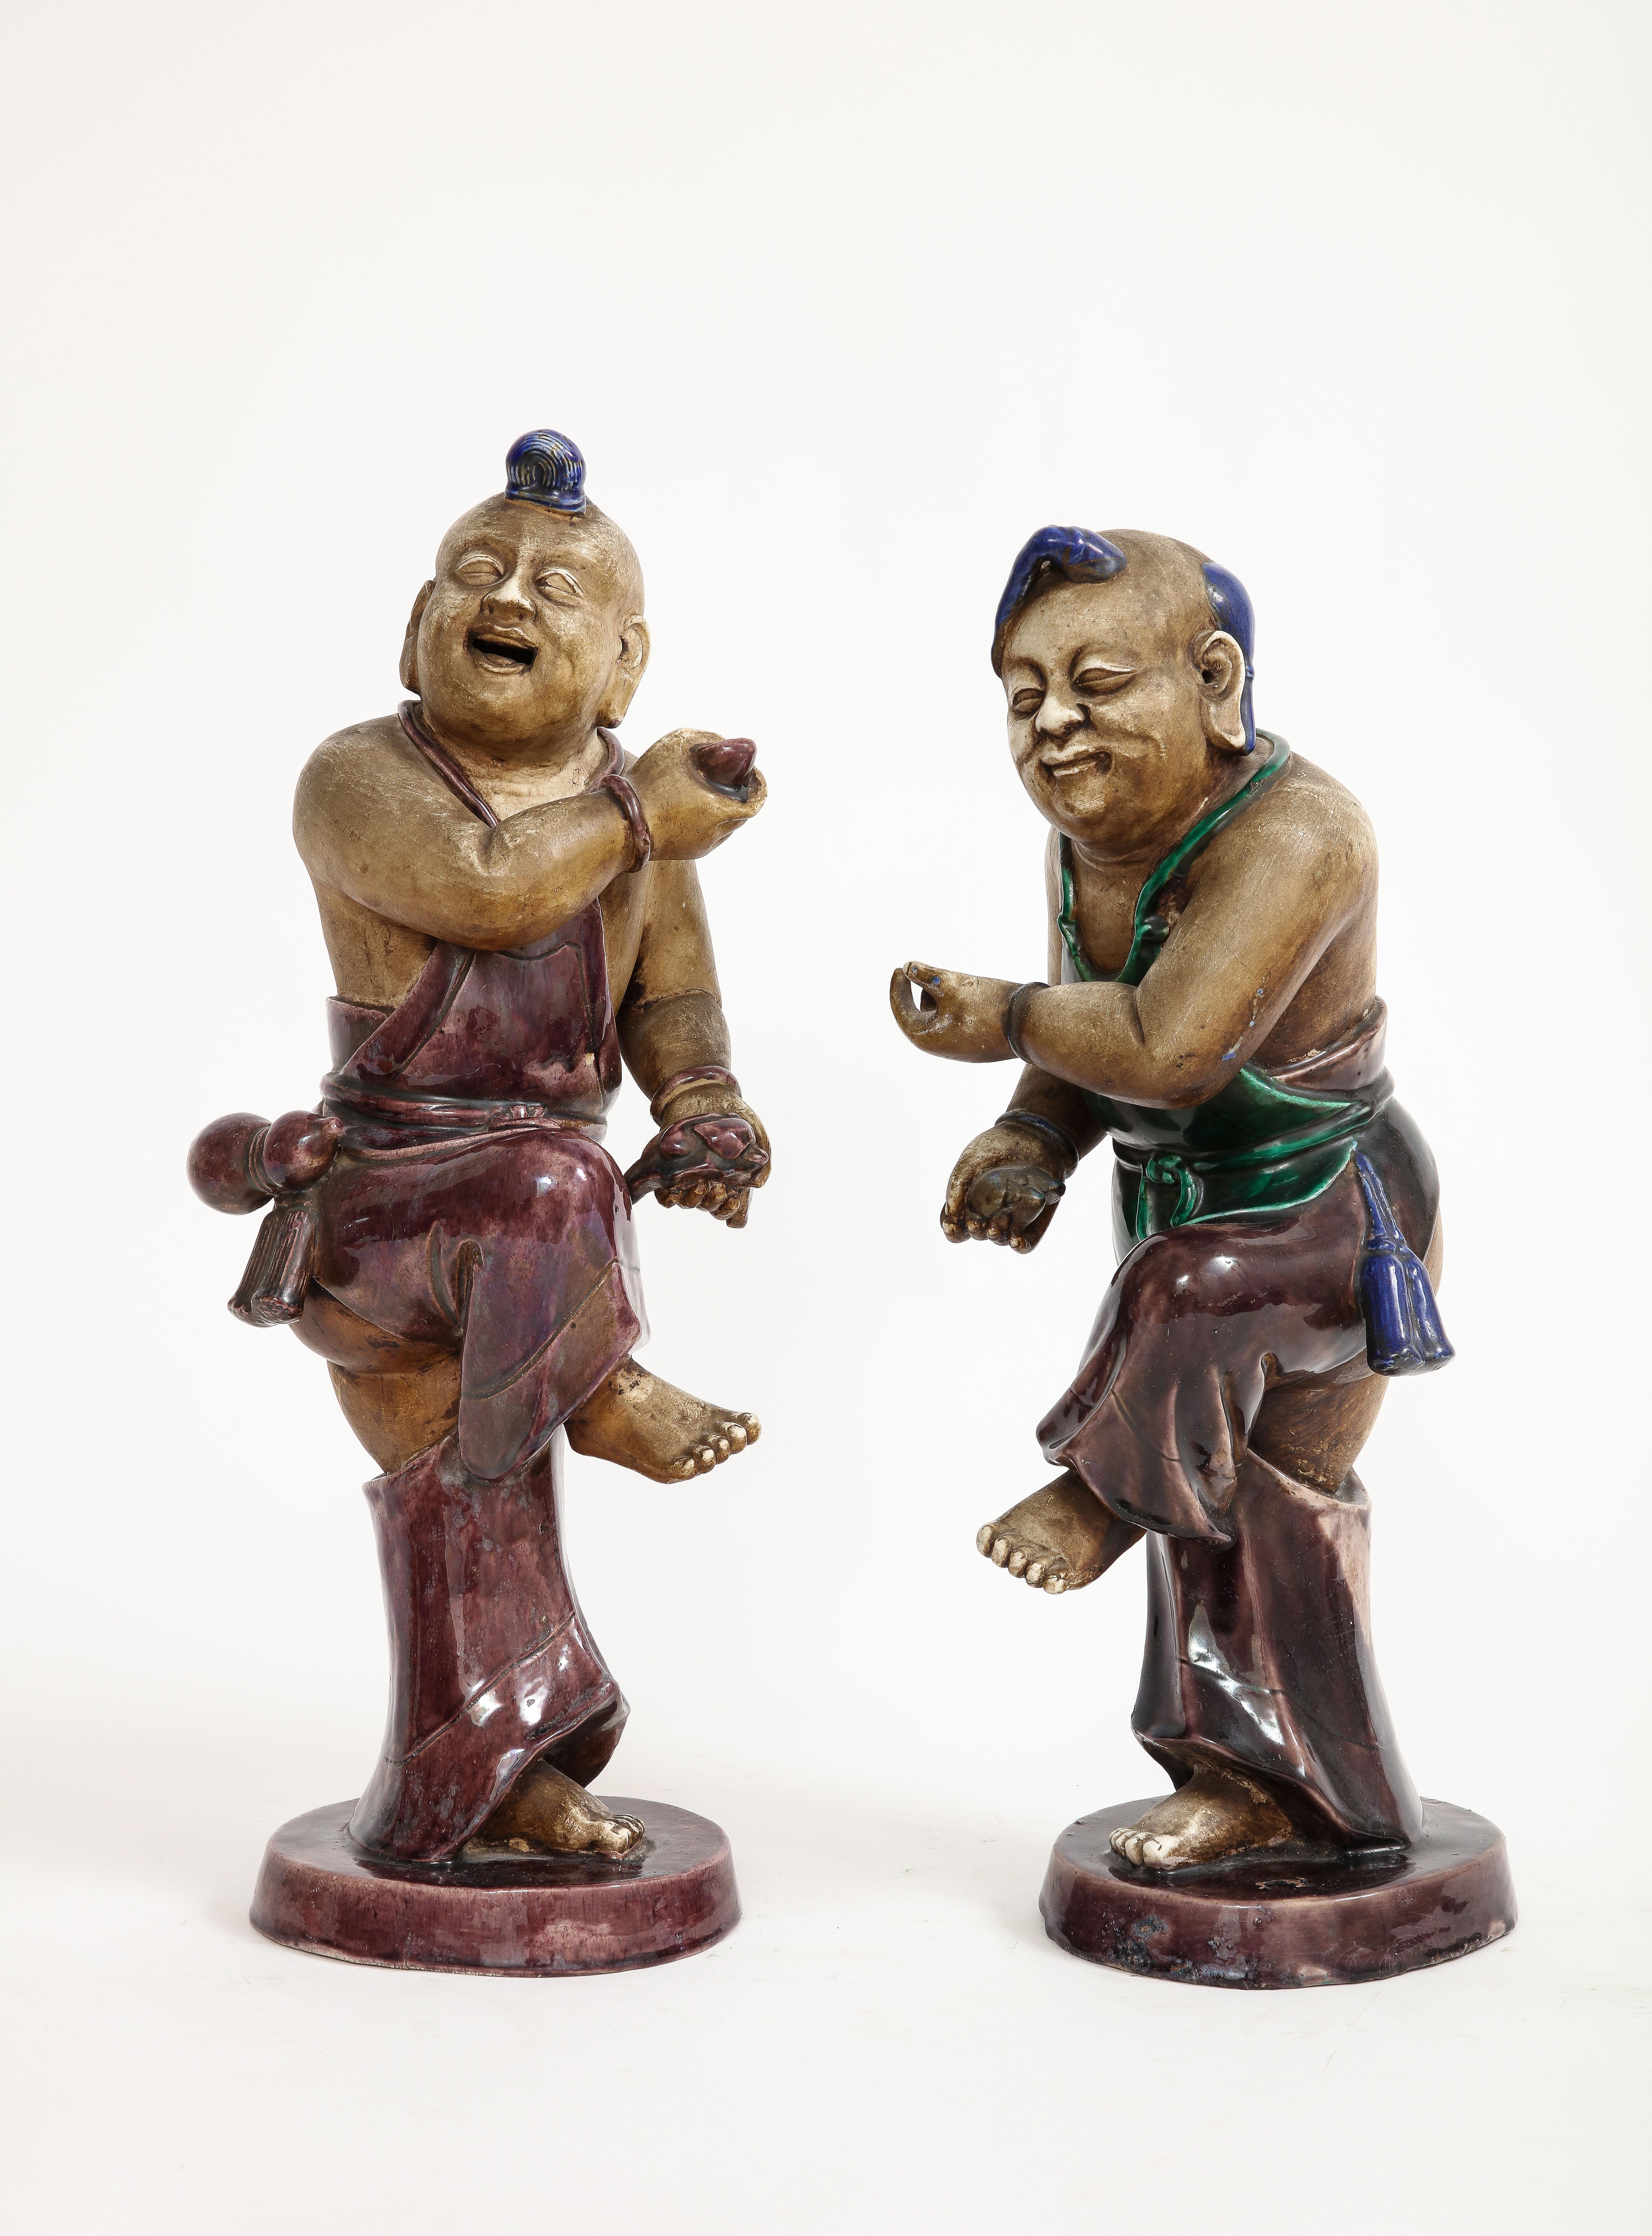 A Rare Pair of Chinese Kangxi 18th Century (1710) Biscuit Porcelain Figures of Boy with Enamel Decoration.  These captivating figures, seemingly caught in the midst of a joyous dance, beckon visitors to immerse themselves in the rich heritage and